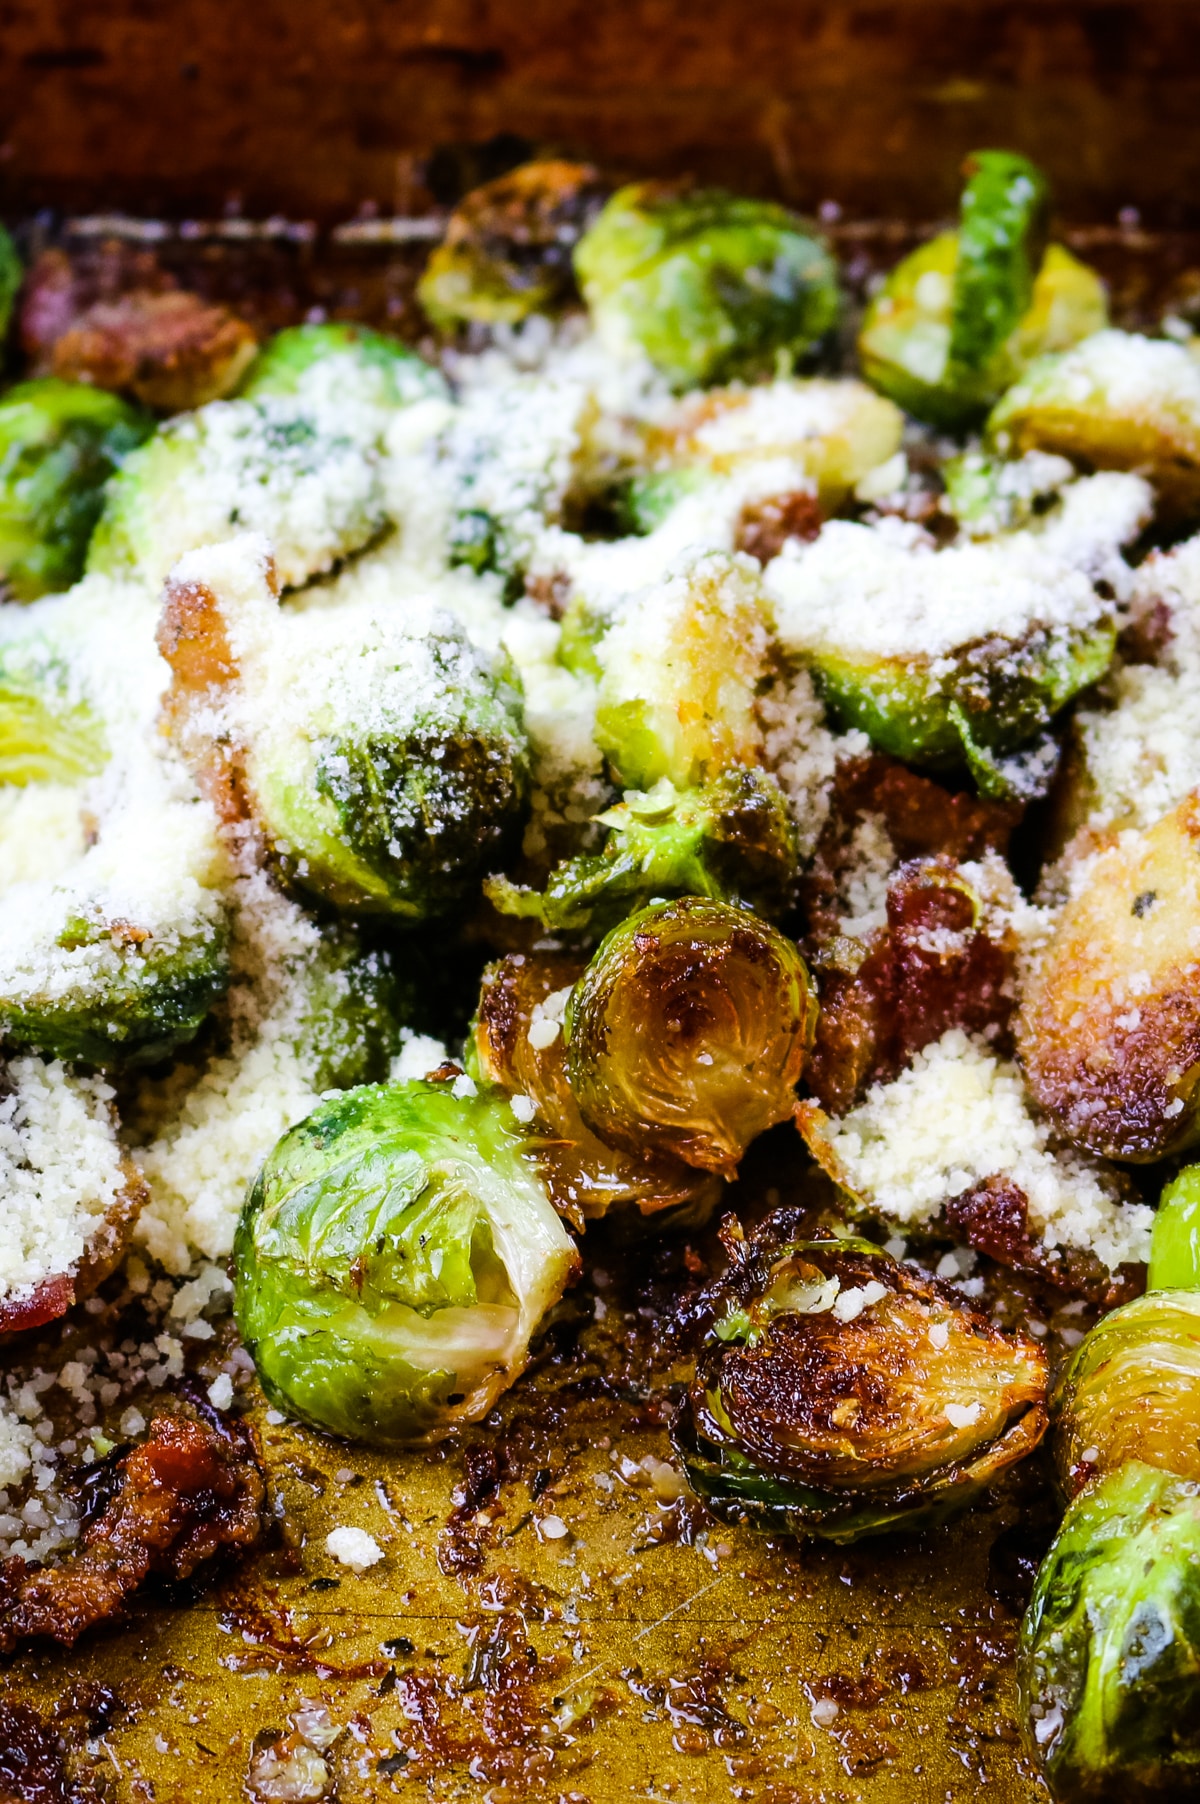 Brussels sprouts with parmesan cheese sprinkled on top